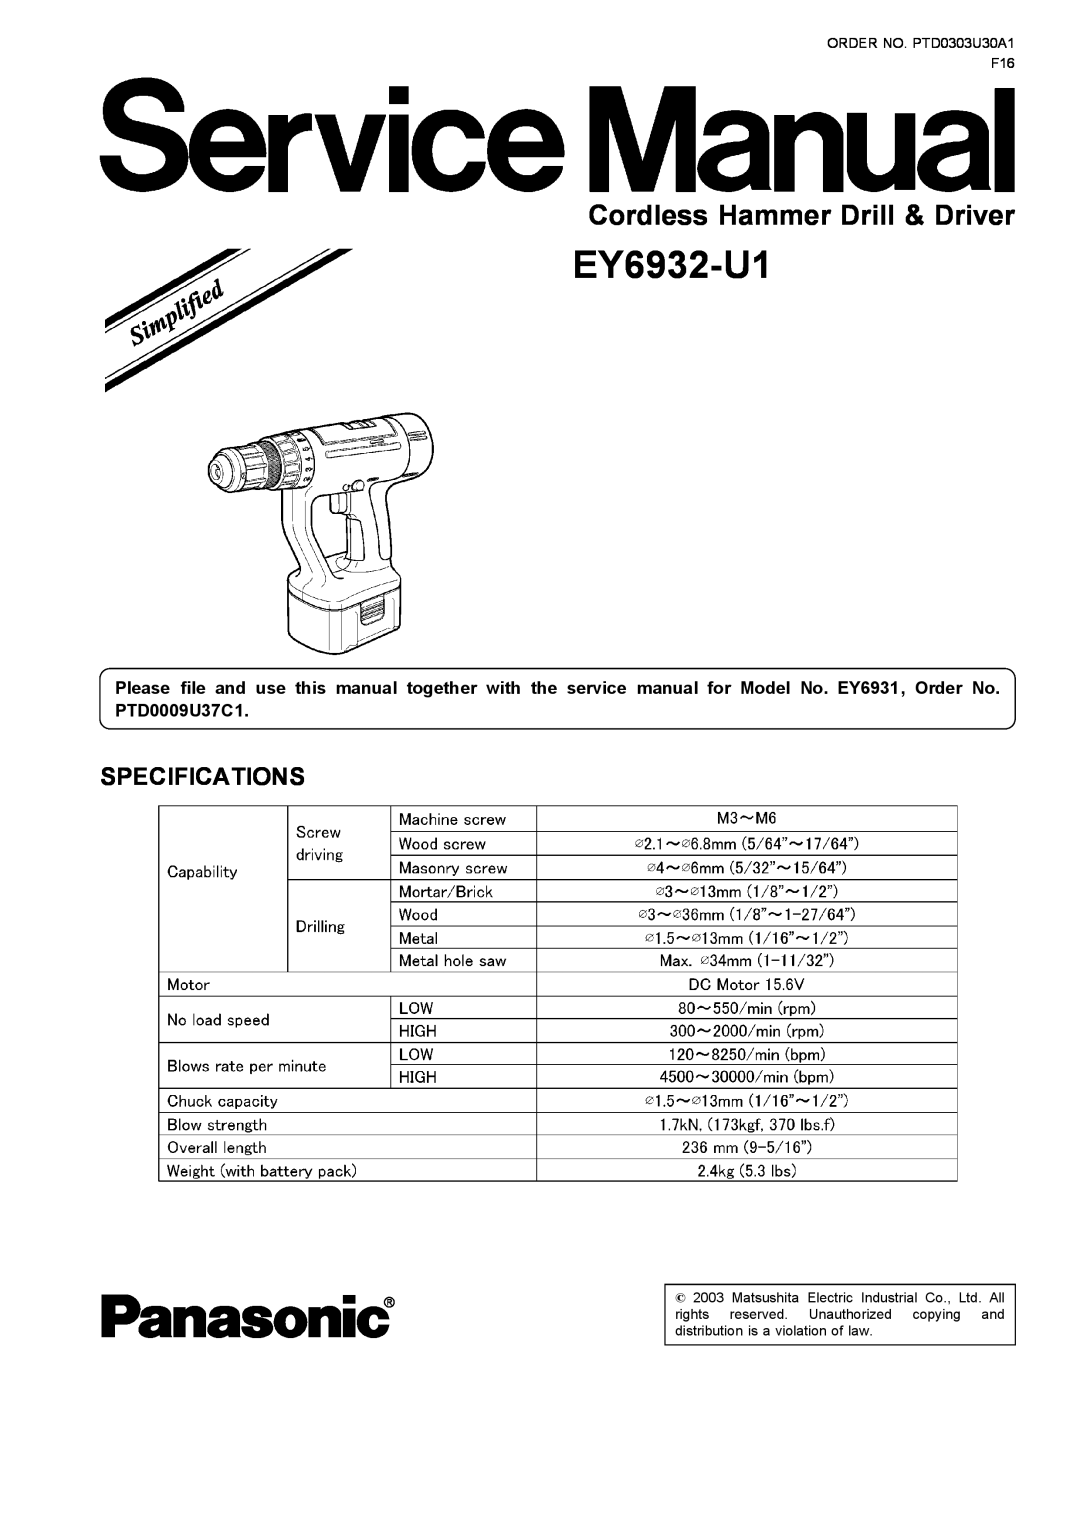 Panasonic EY6932-U1 specifications Cordless Hammer Drill & Driver, Specifications, ORDER NO. PTD0303U30A1 F16 